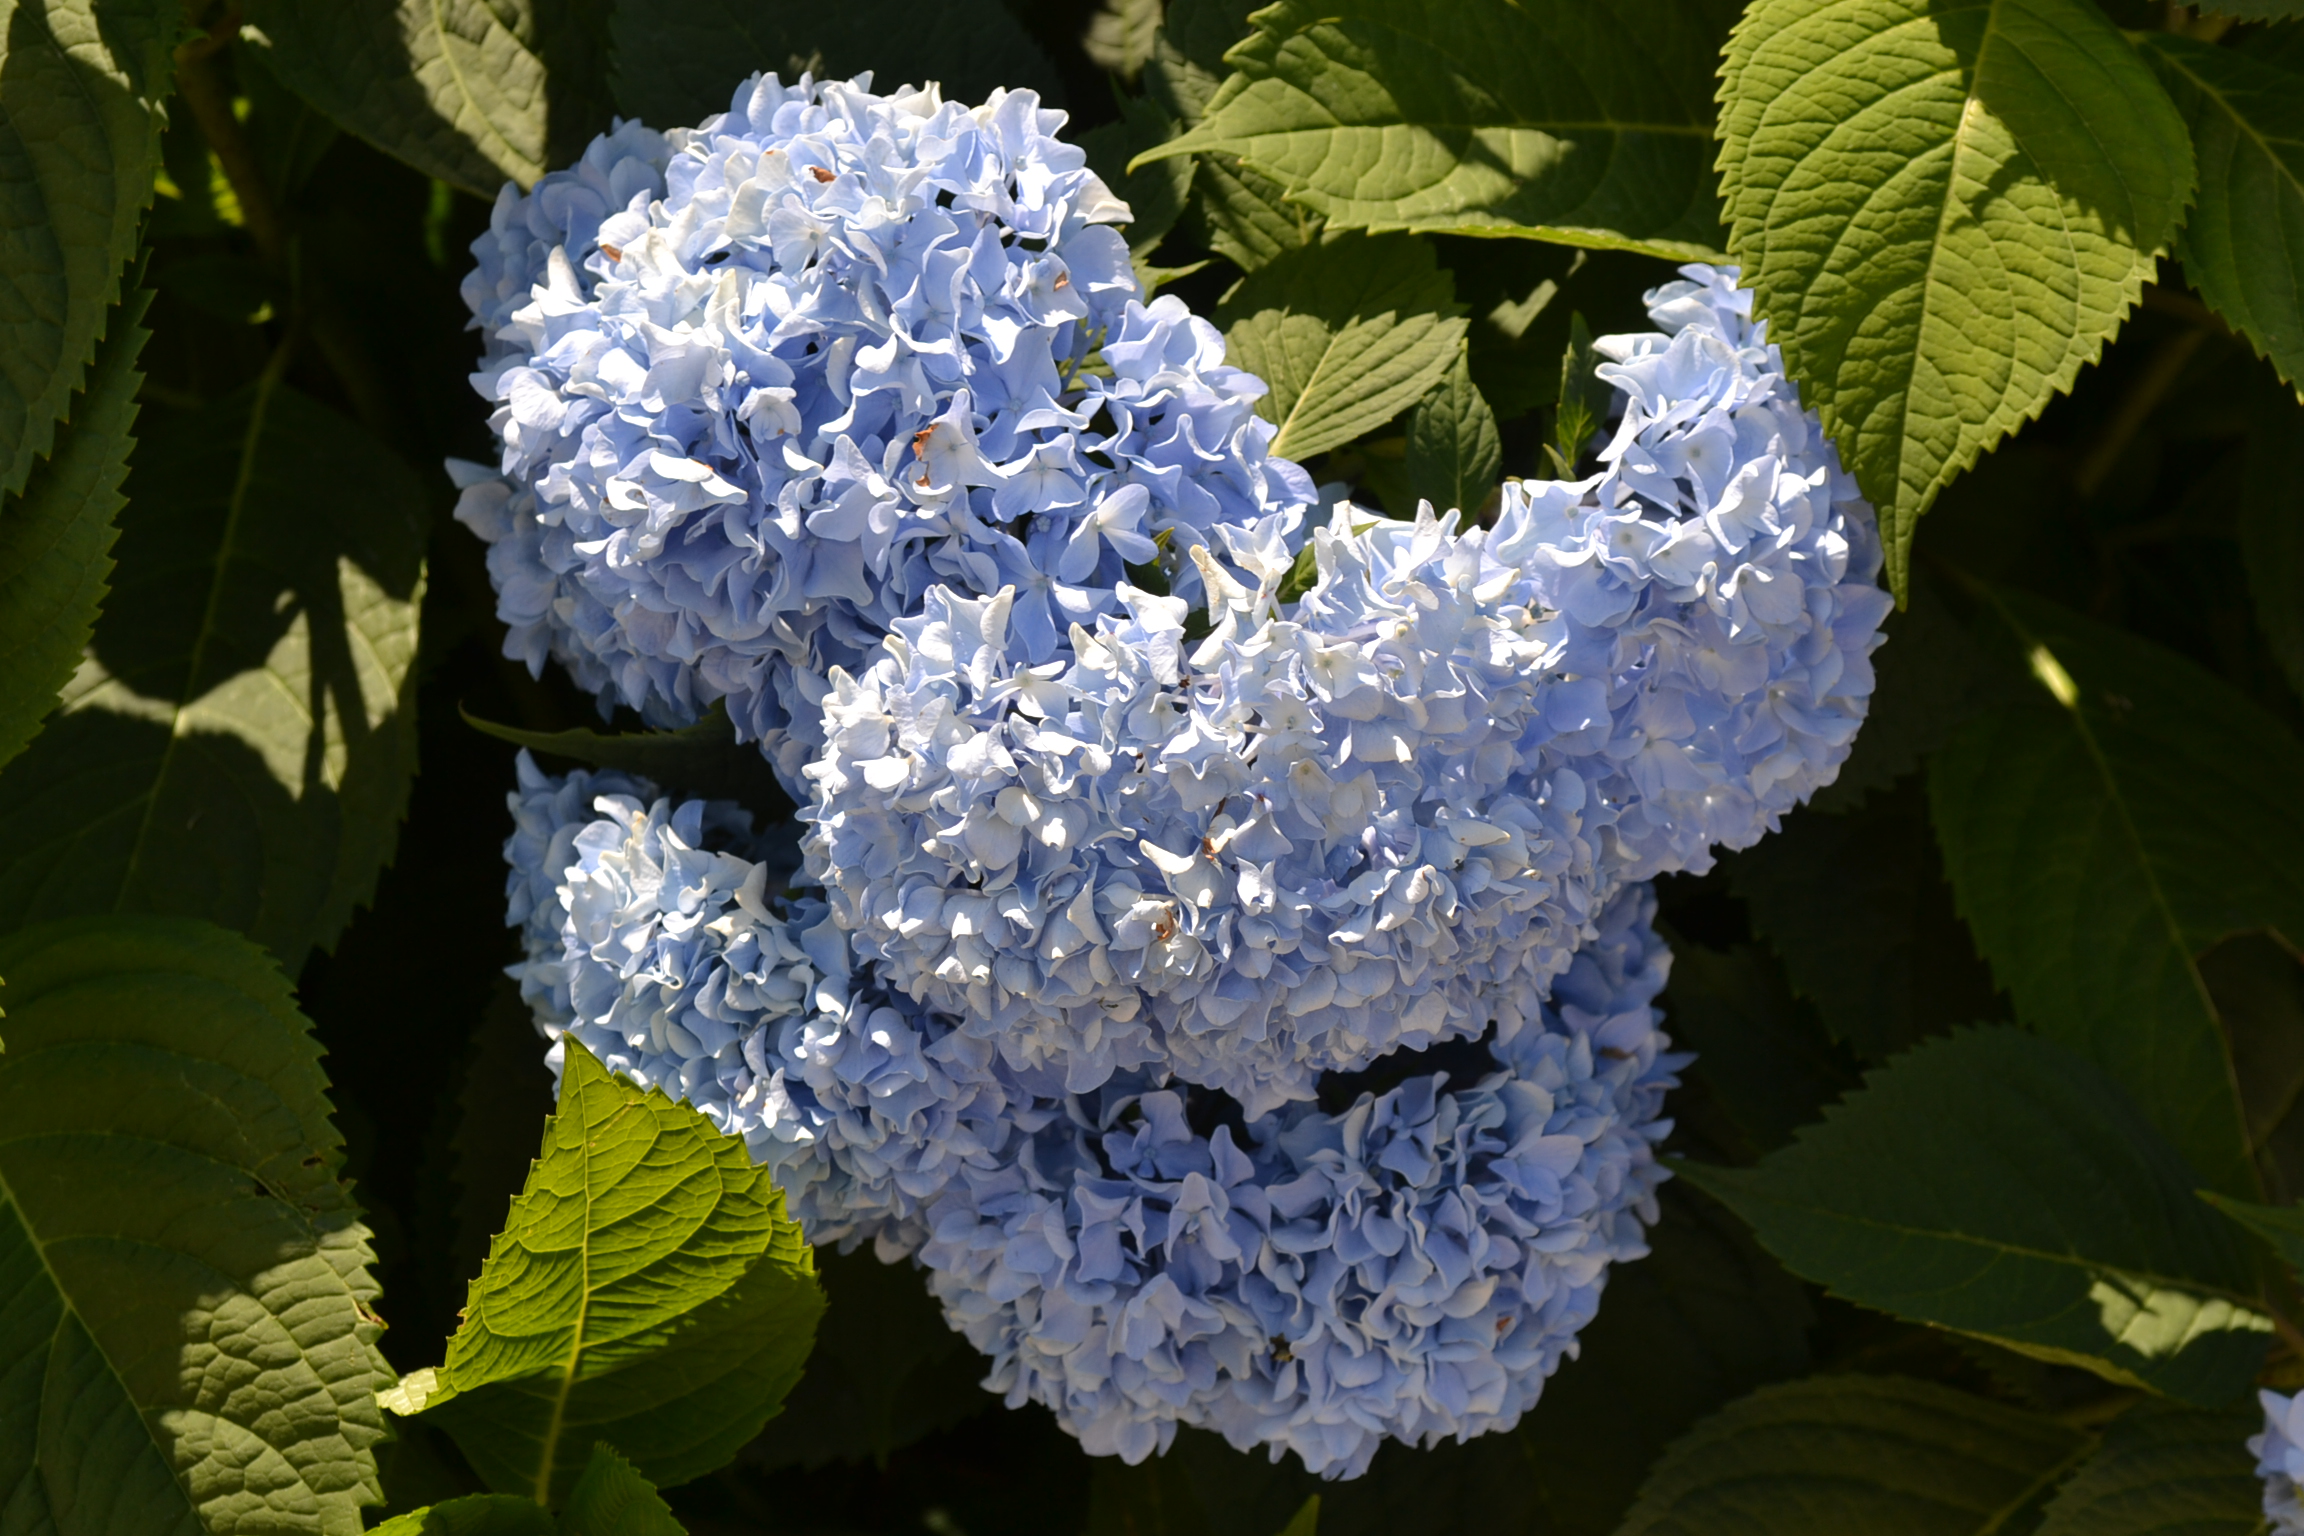 Endless Summer Hydrangea ® is a colorful shrub that blooms 